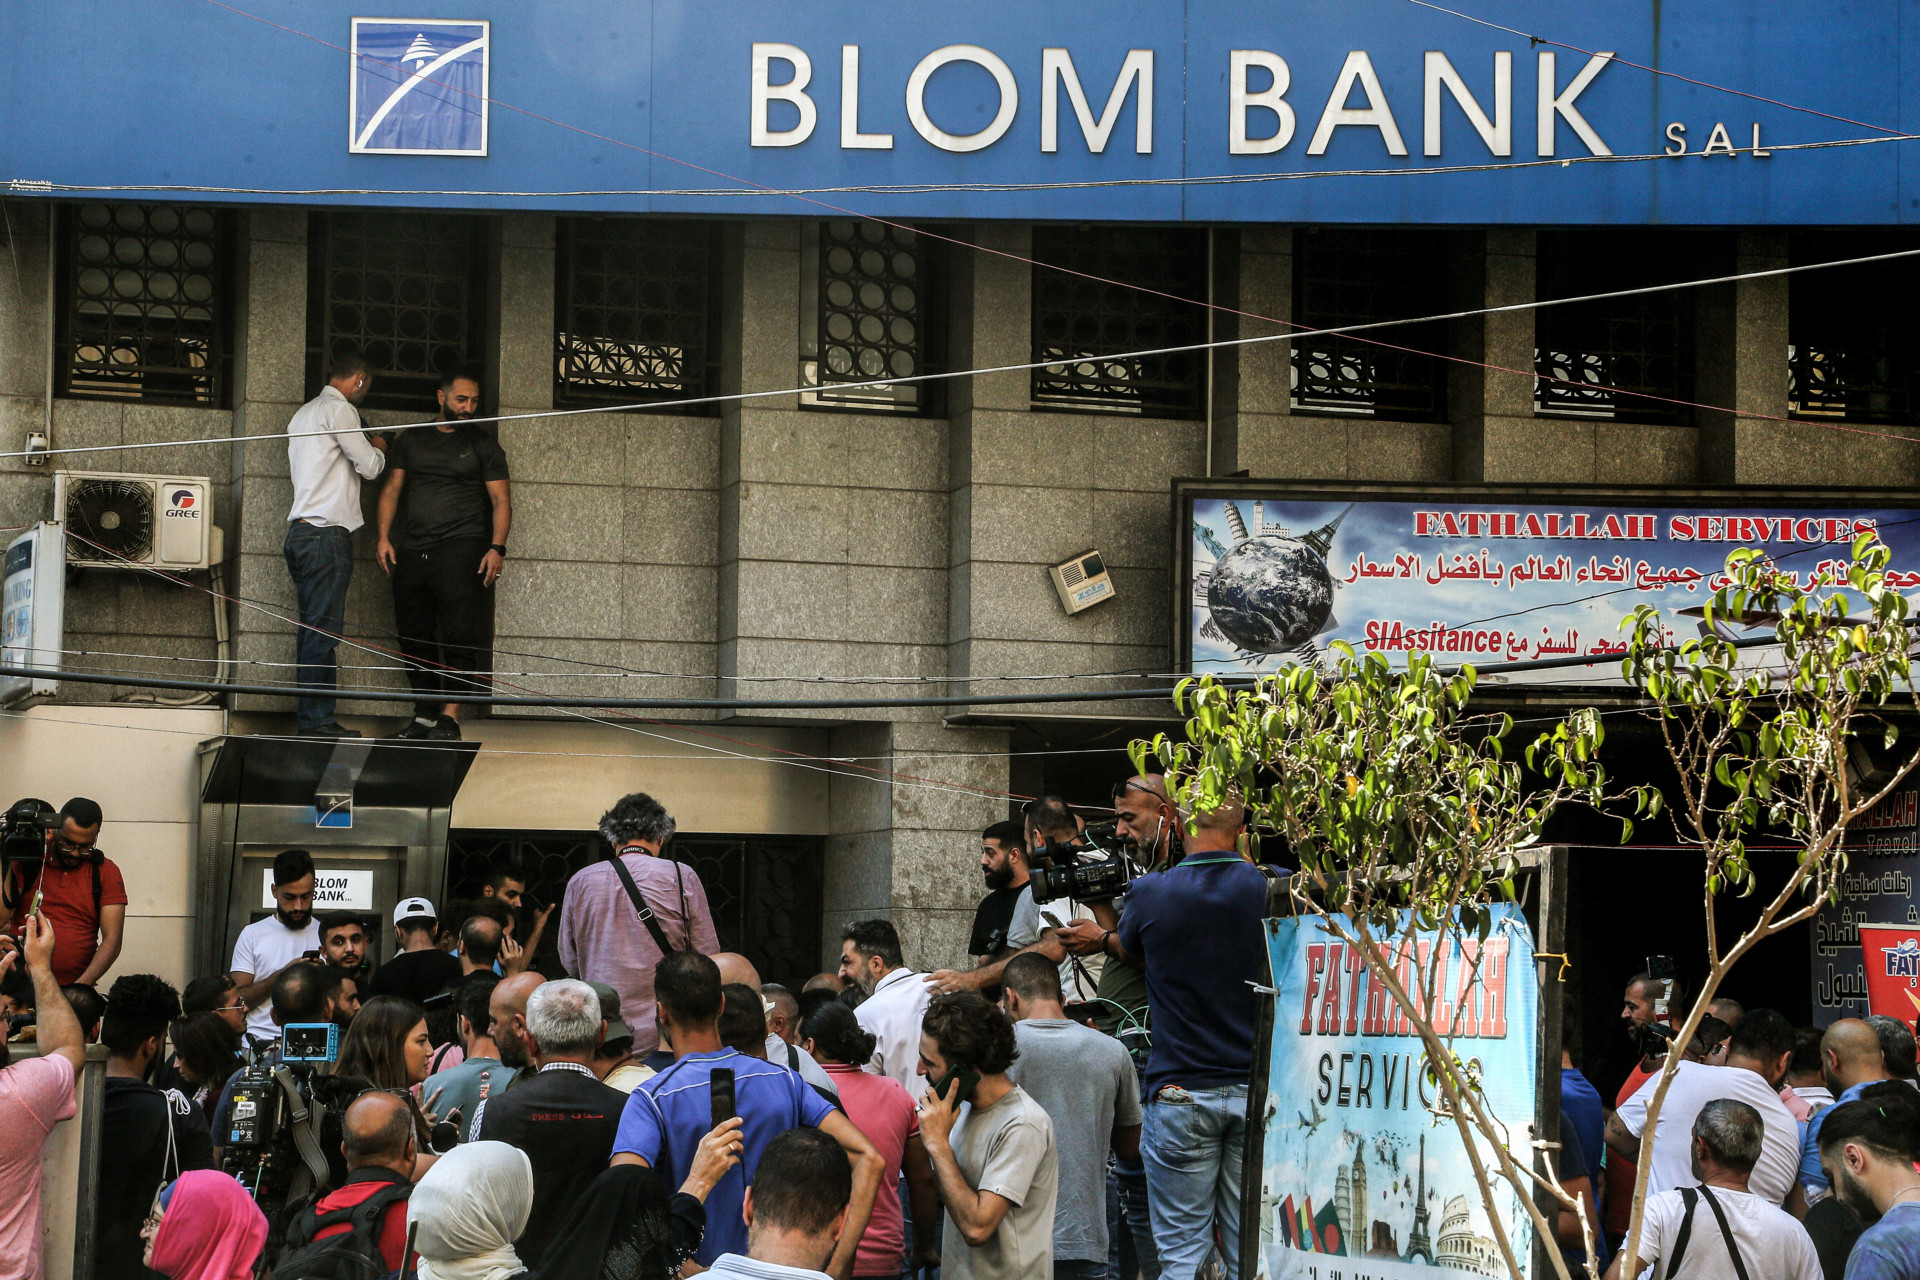 Bank ‘Robberies’ Are a Symptom of Deeper Crises in Lebanon